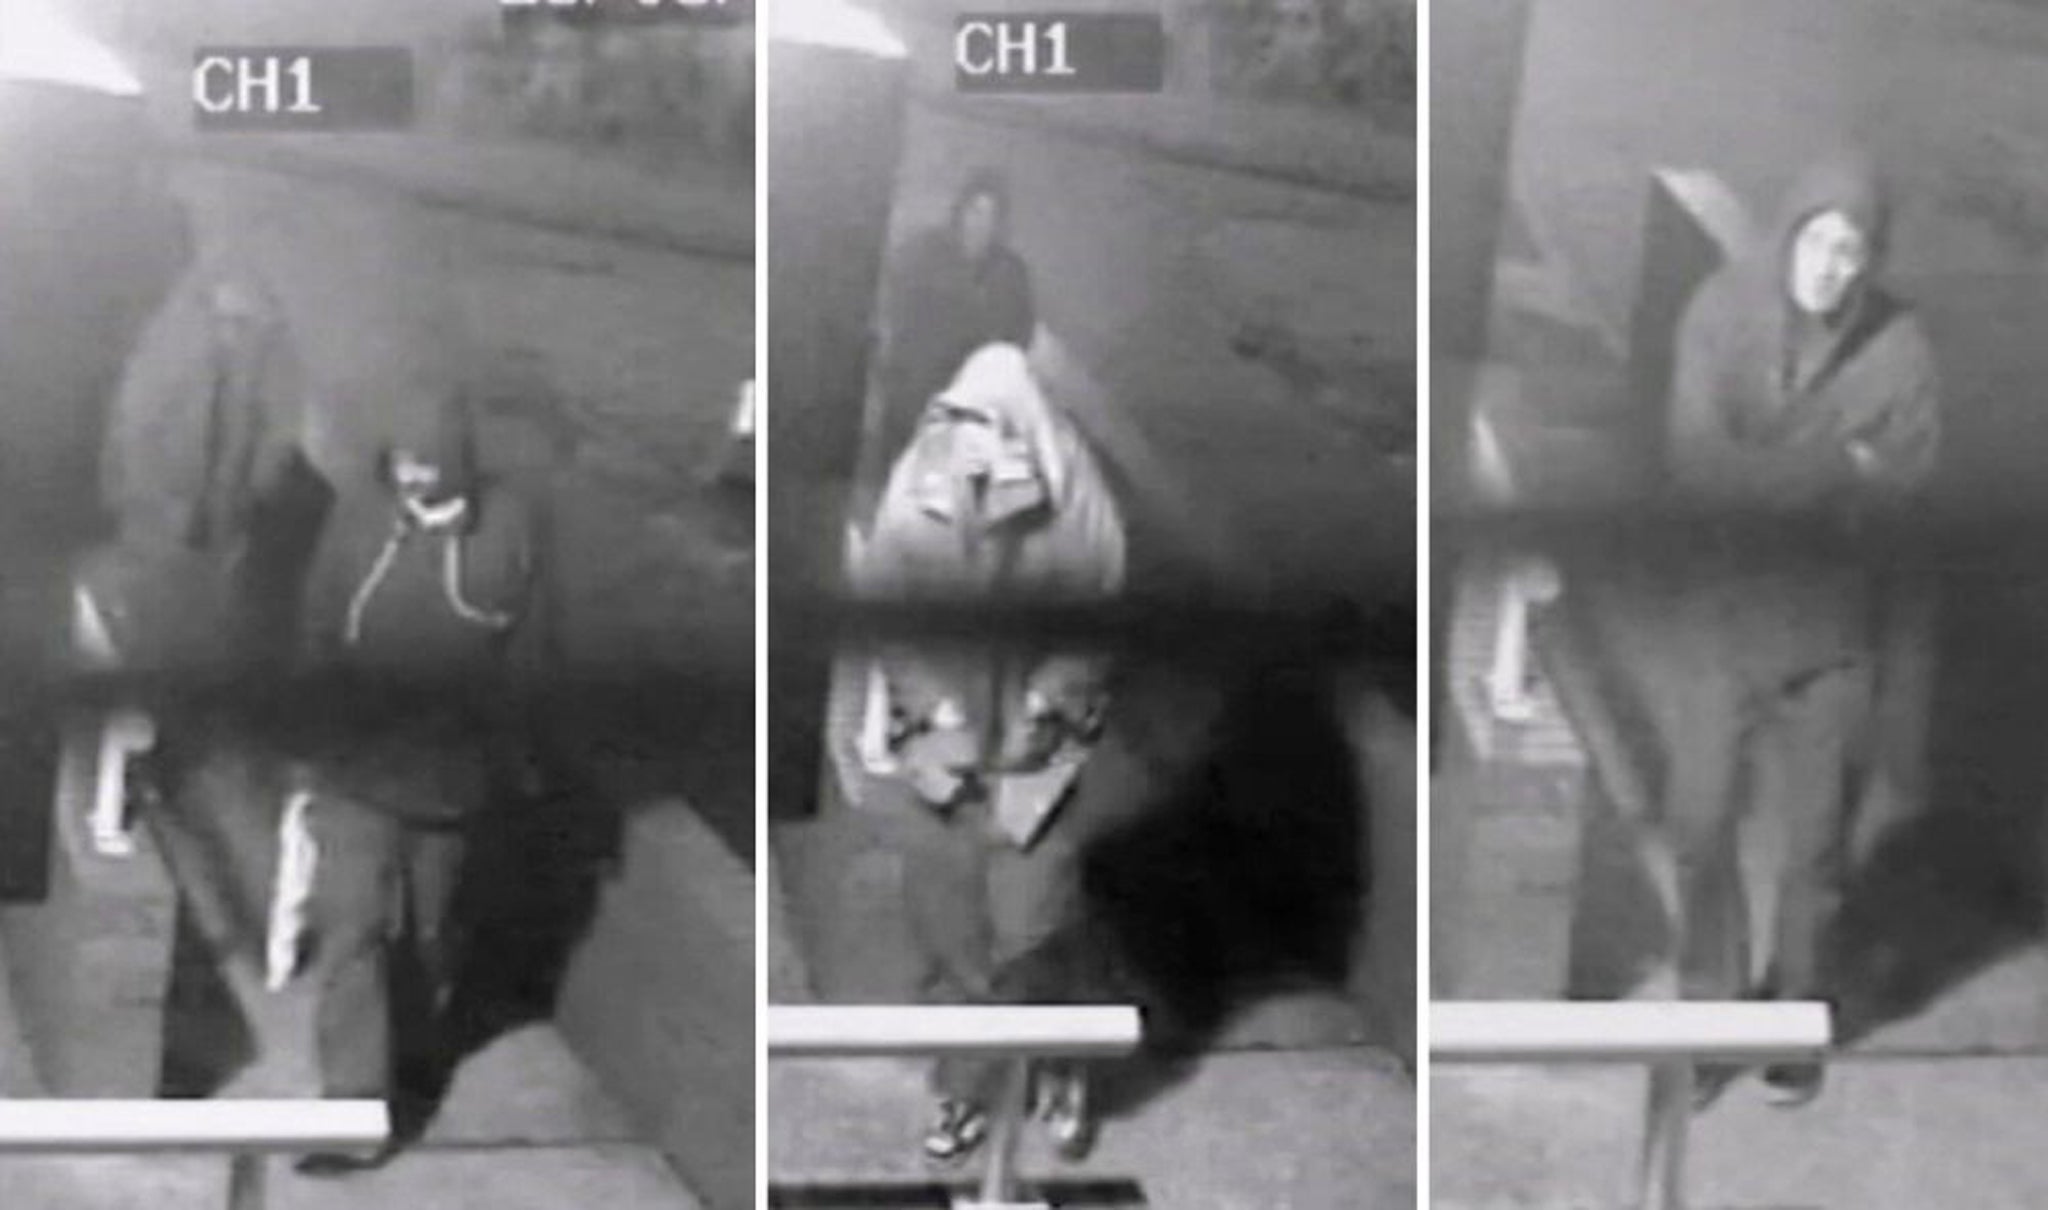 CCTV images released by Essex police show three men suspected of an arson attack on an Islamic centre in Harlow